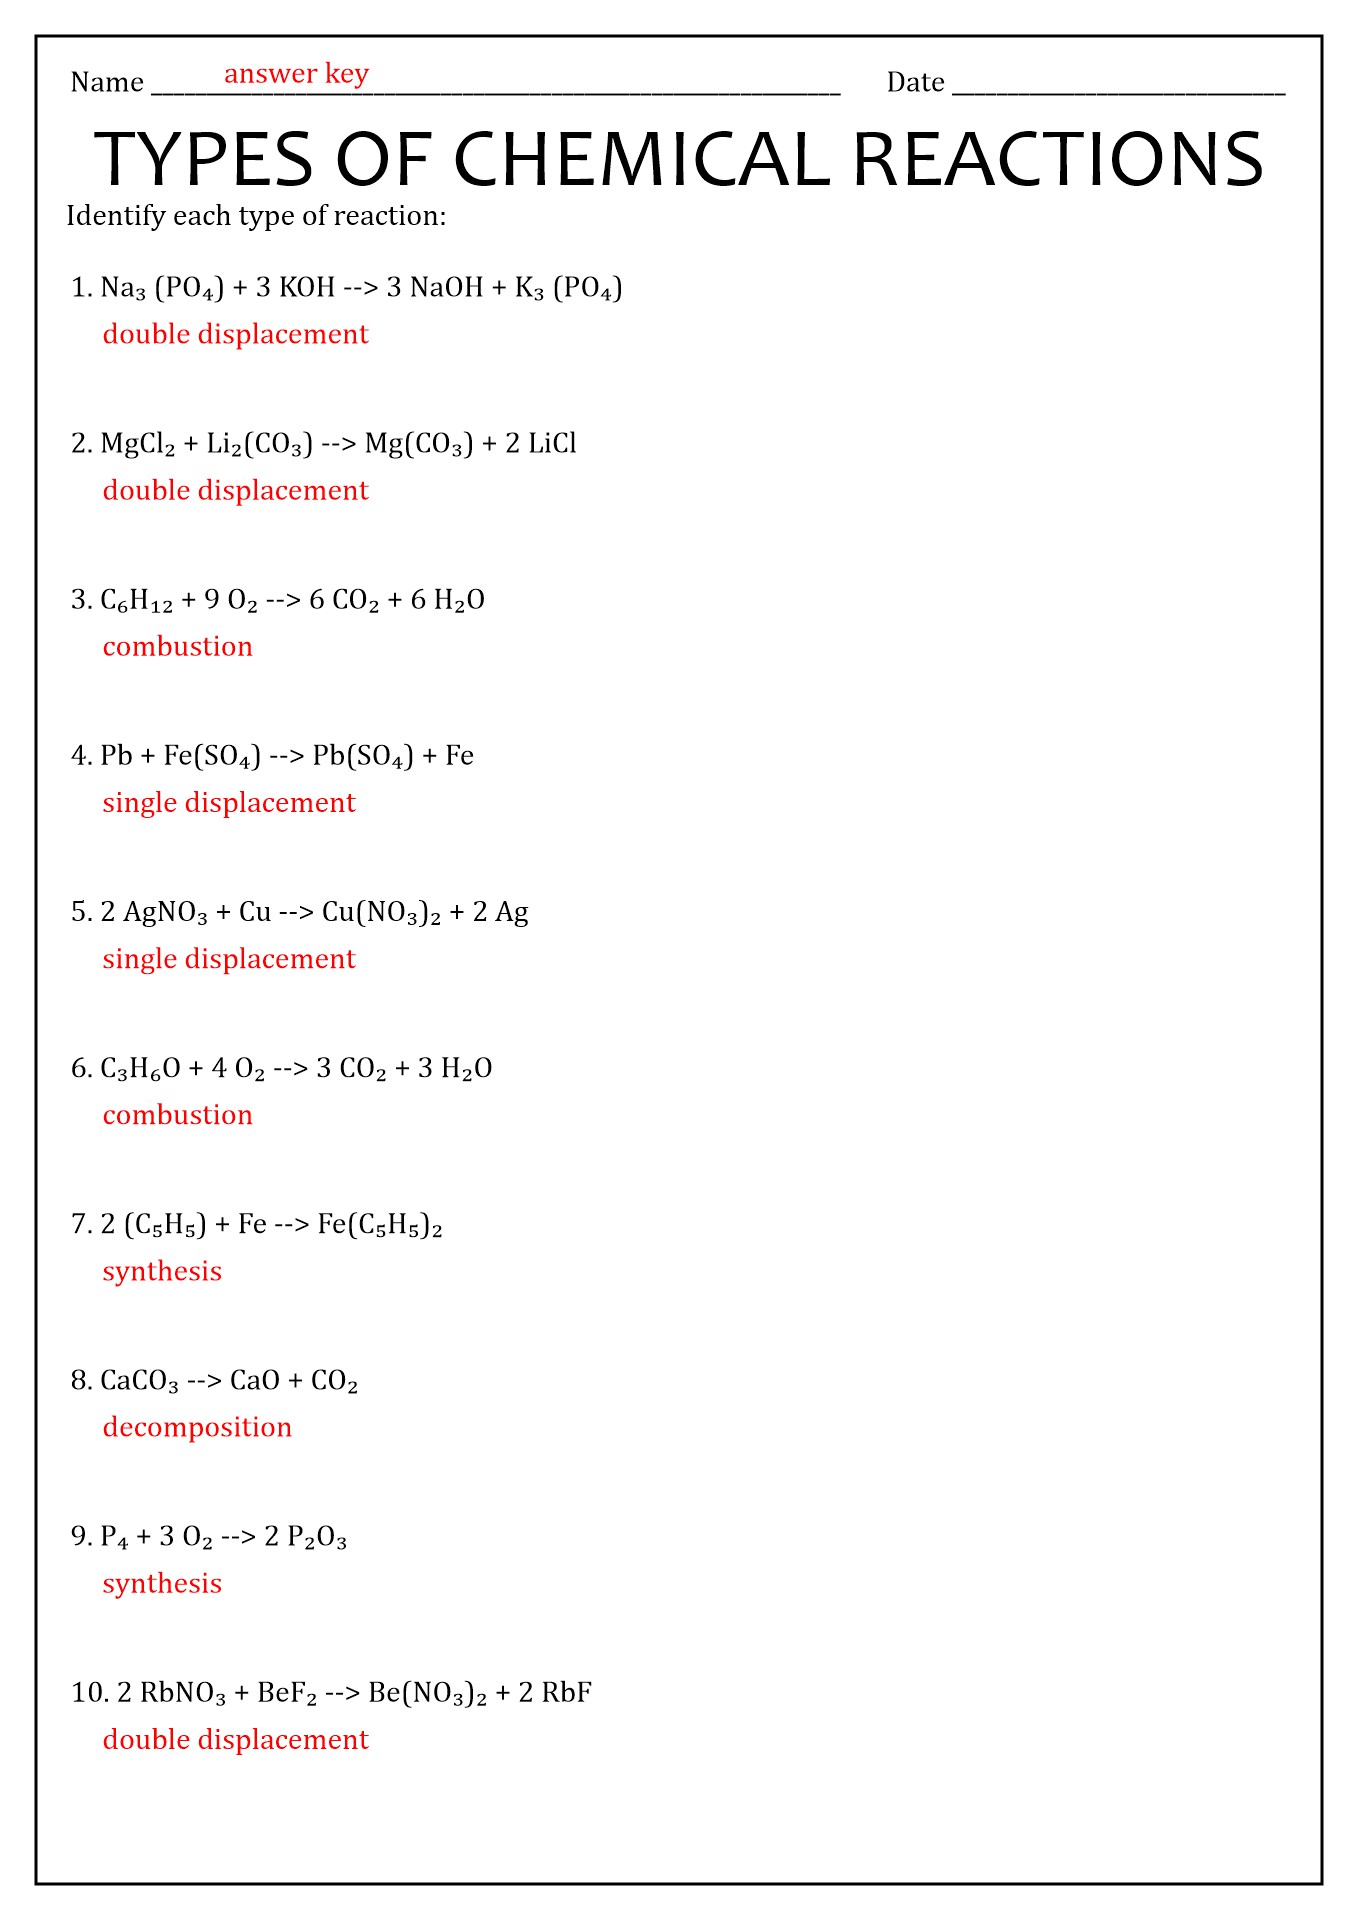 types-of-chemical-reactions-worksheet-free-download-gambr-co